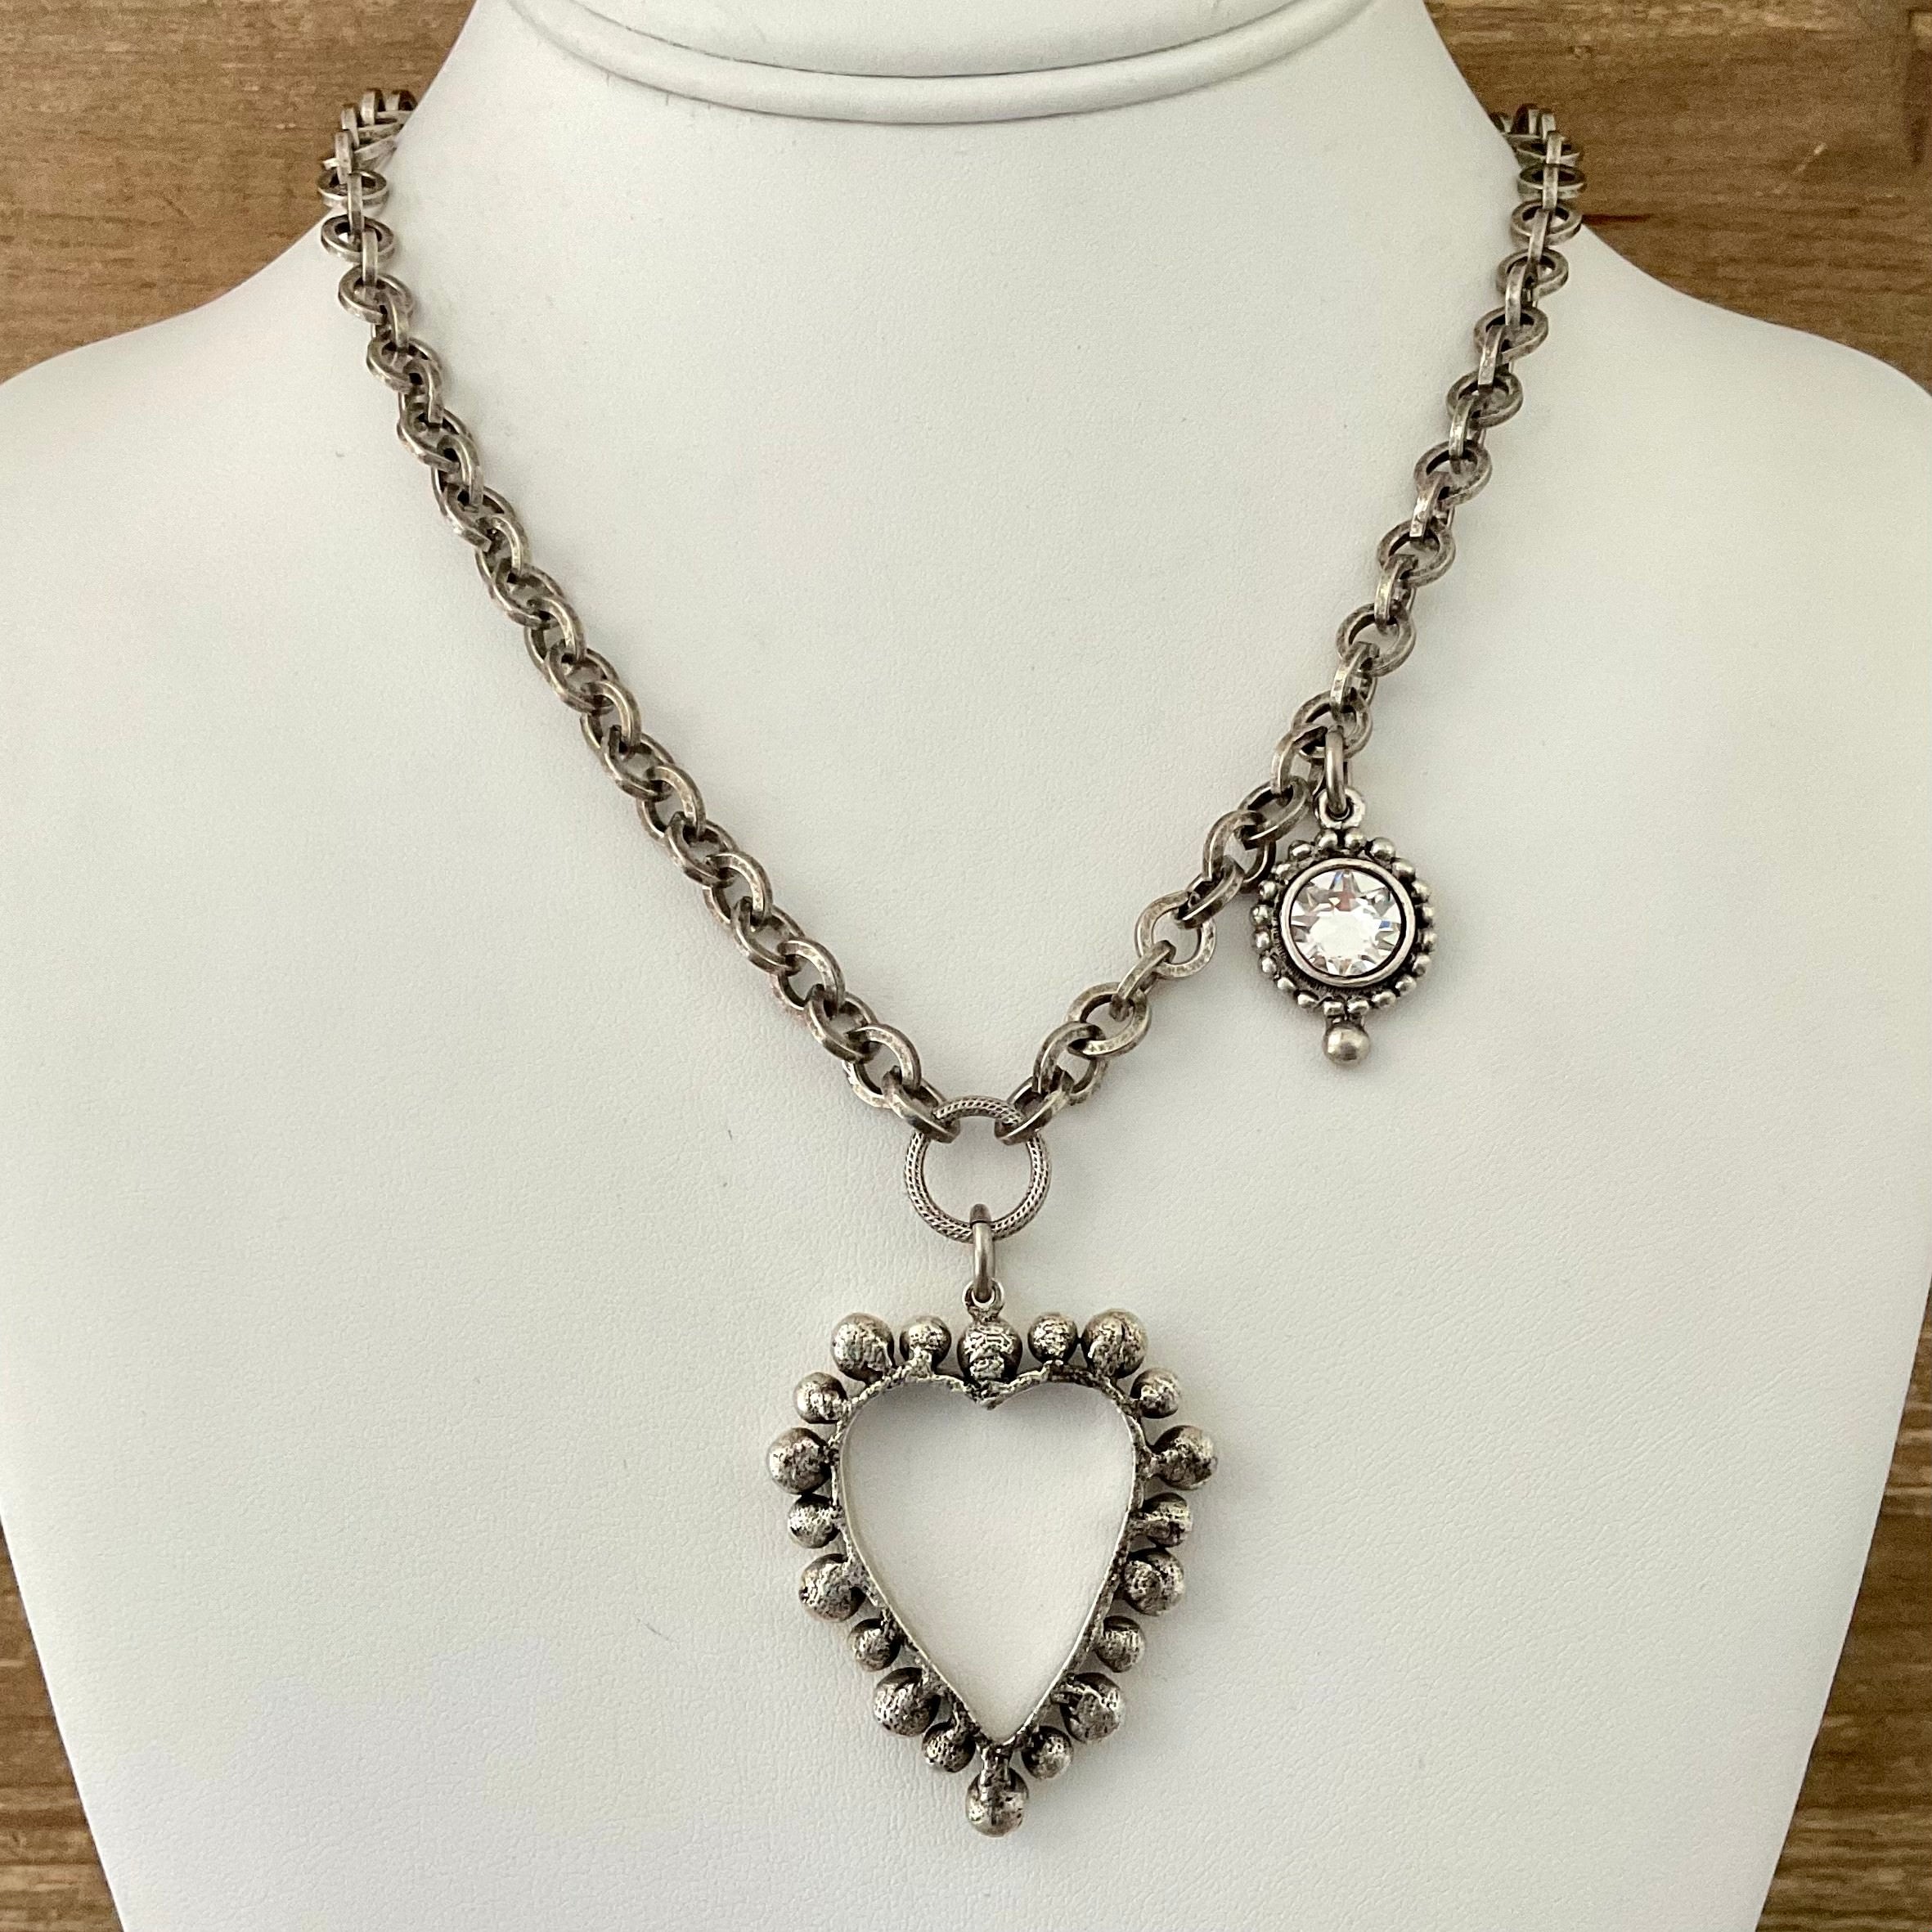 Vintage Sterling Plated Chain with Silver Heart Pendant & Crystal 18"